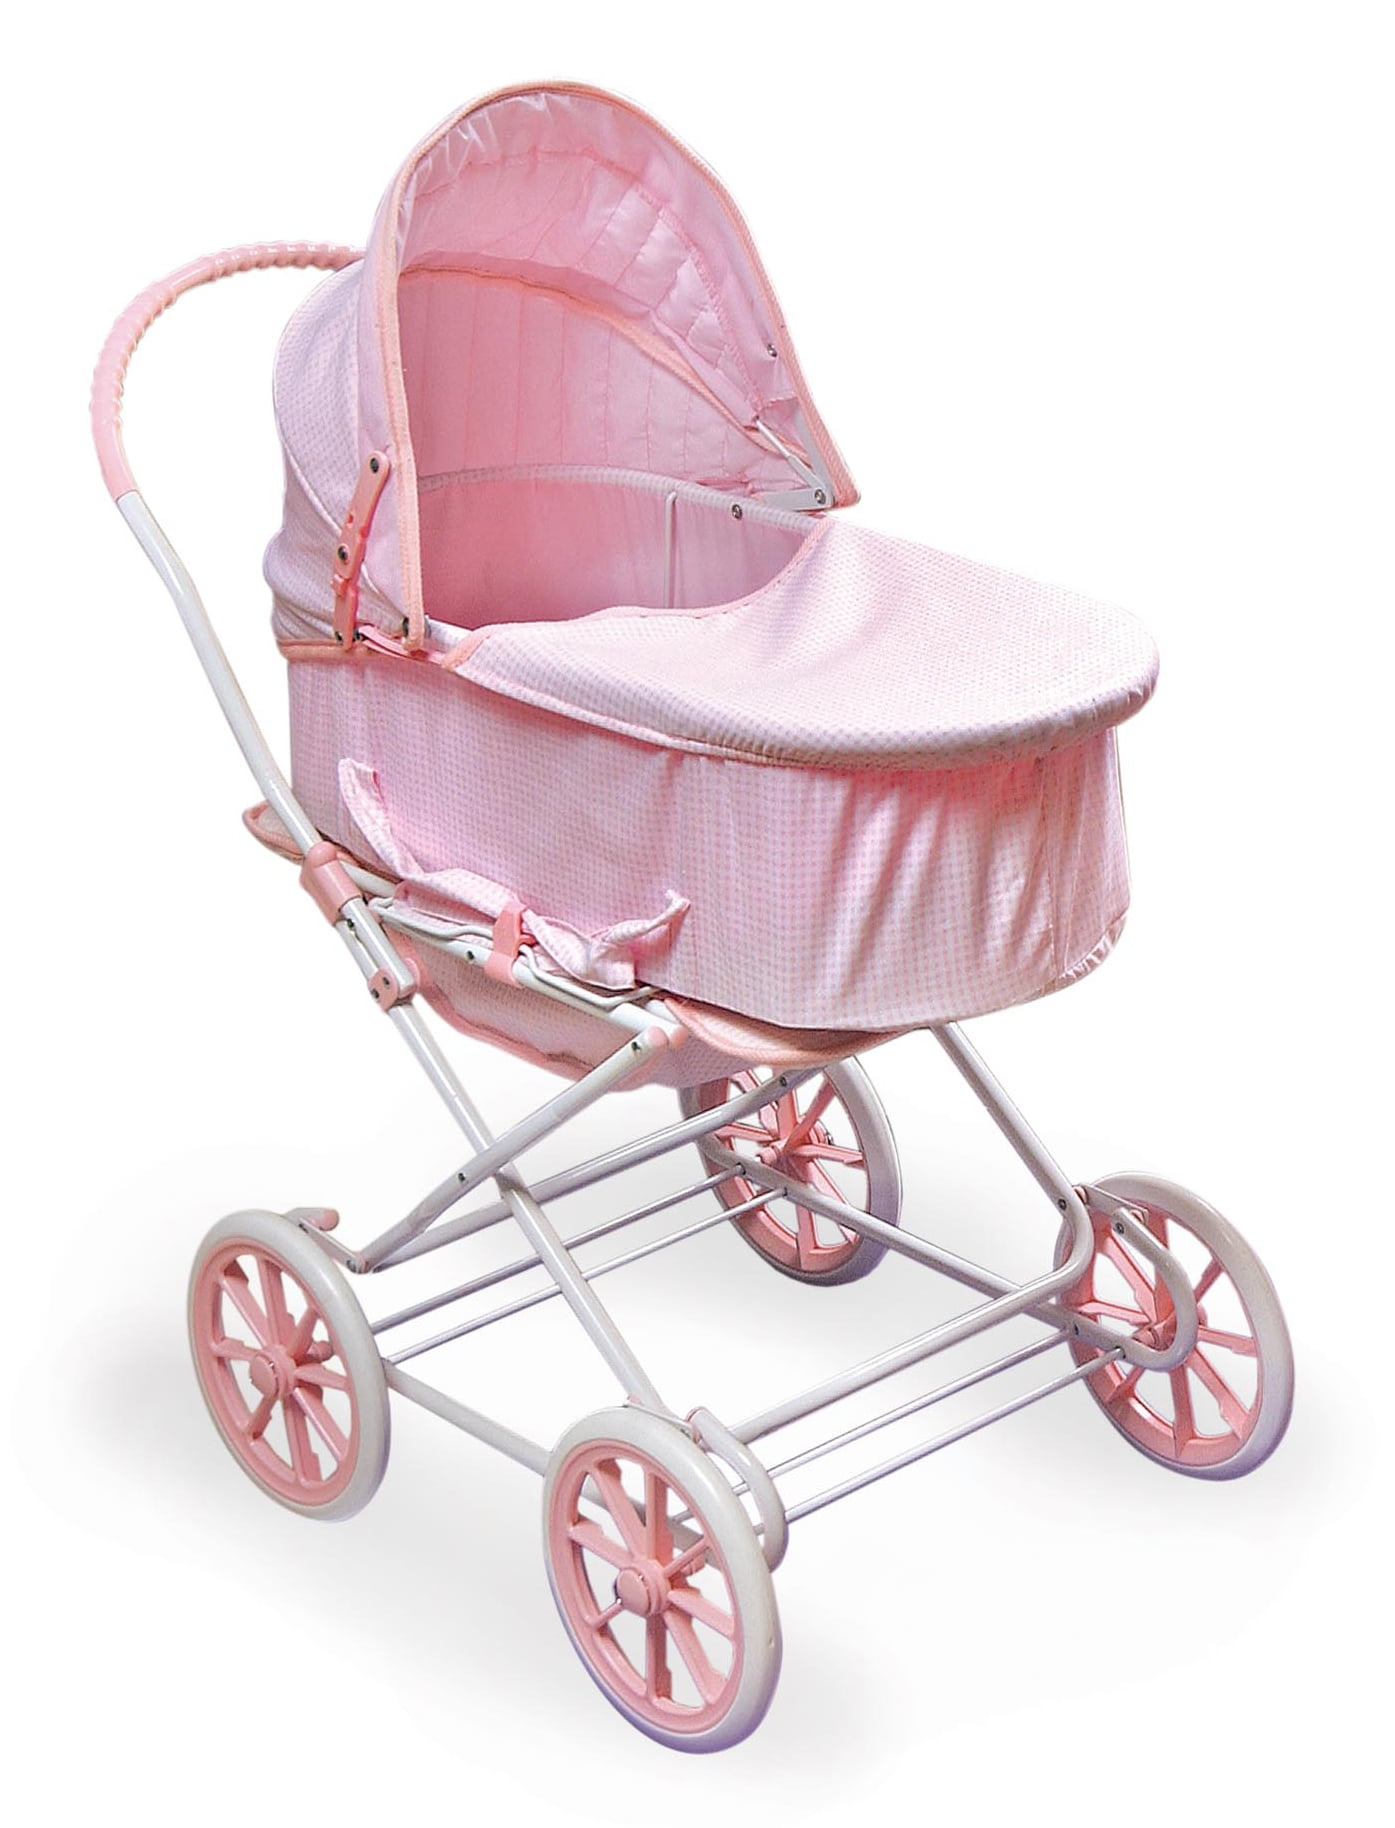 dolls buggy for 10 year old